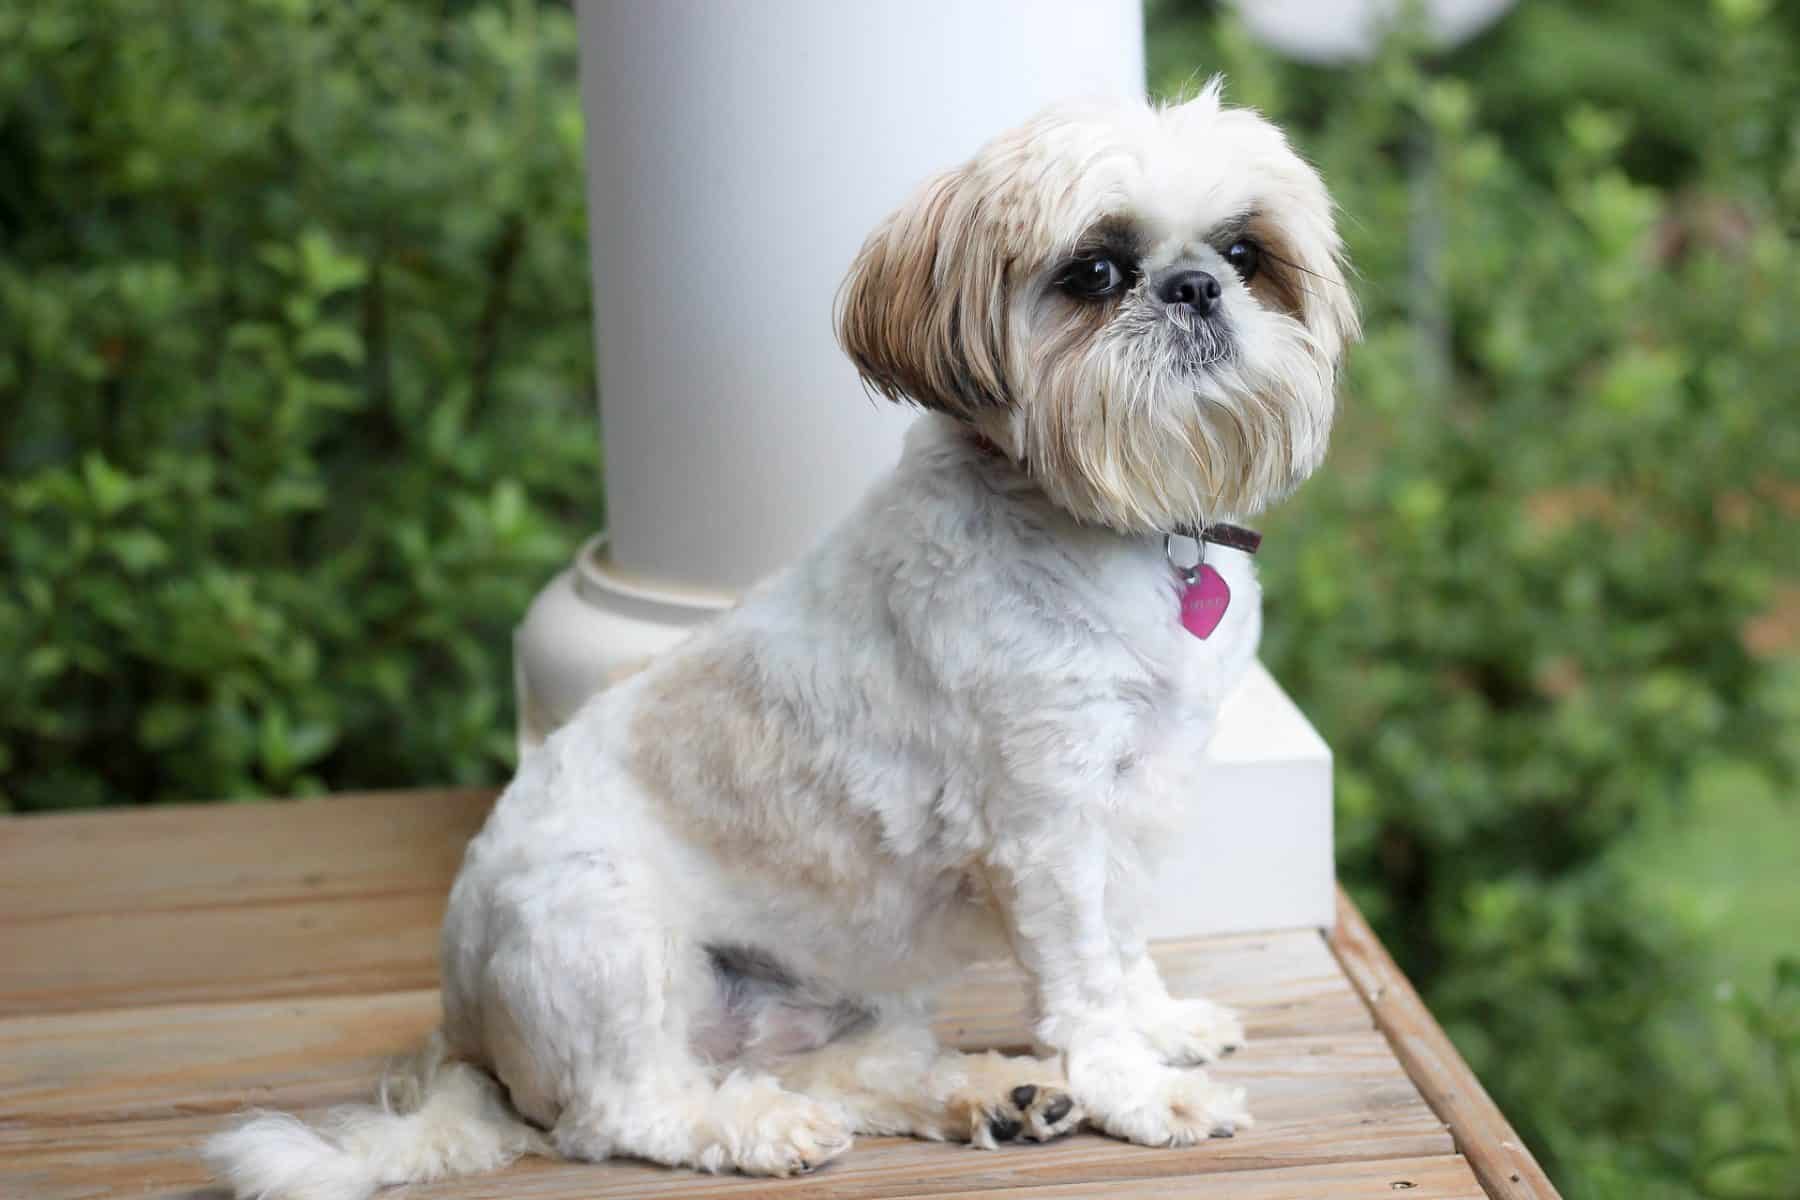 The Top 5 Shih Tzu Haircut Styles The Dog People By Rover Com